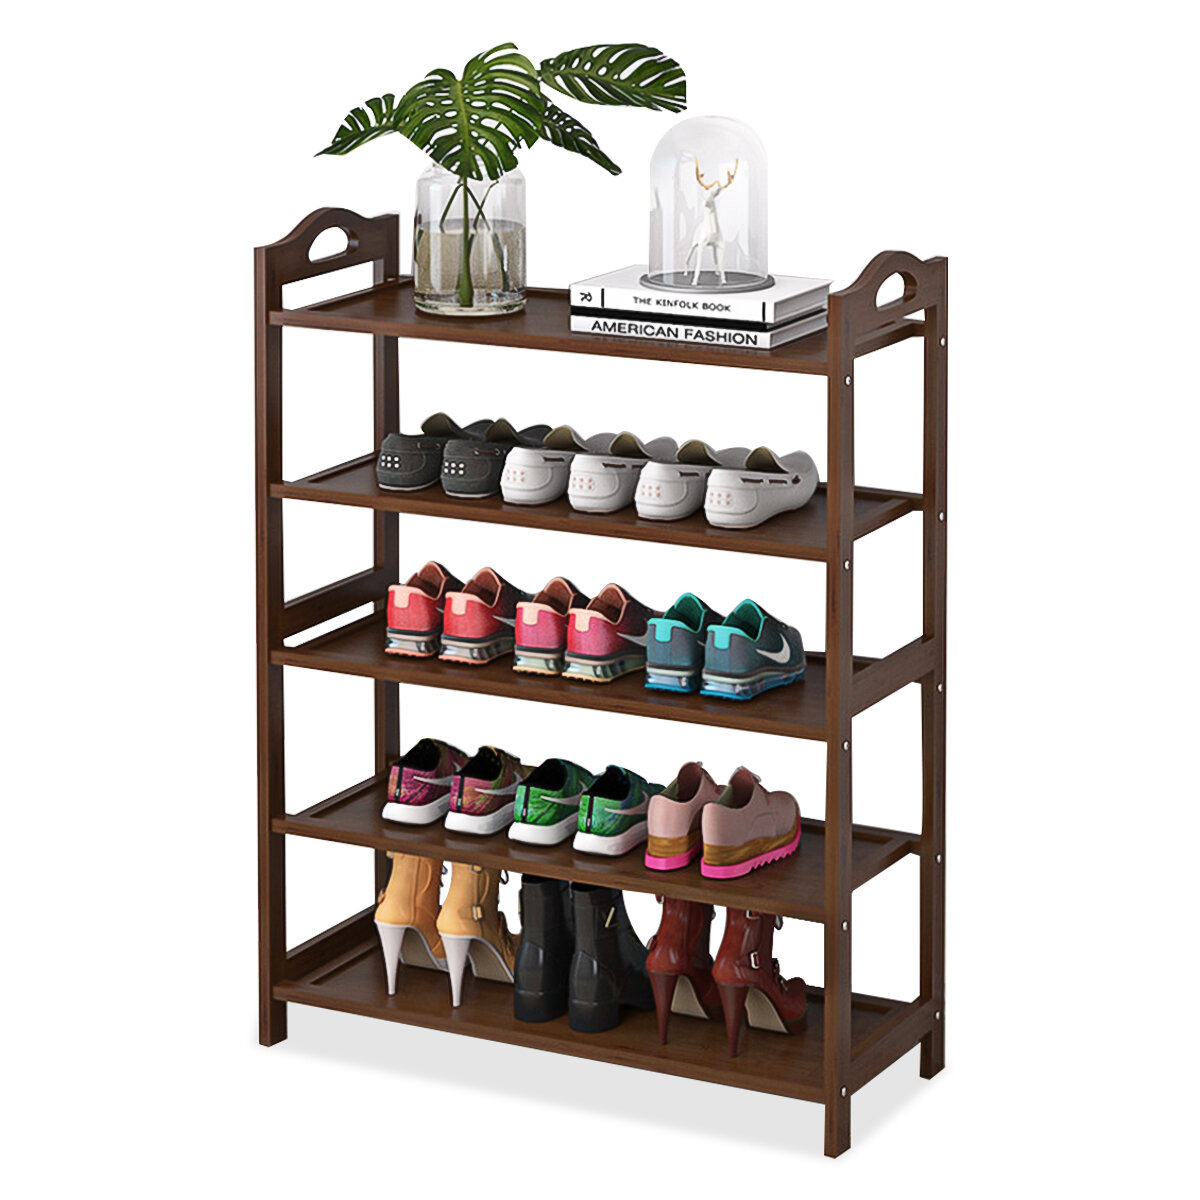 3/4/5/6 Tiers Shoe Rack Multi-layers Storage Shelf Space Saving Organizer Books Decorations Stand for Home Office COD